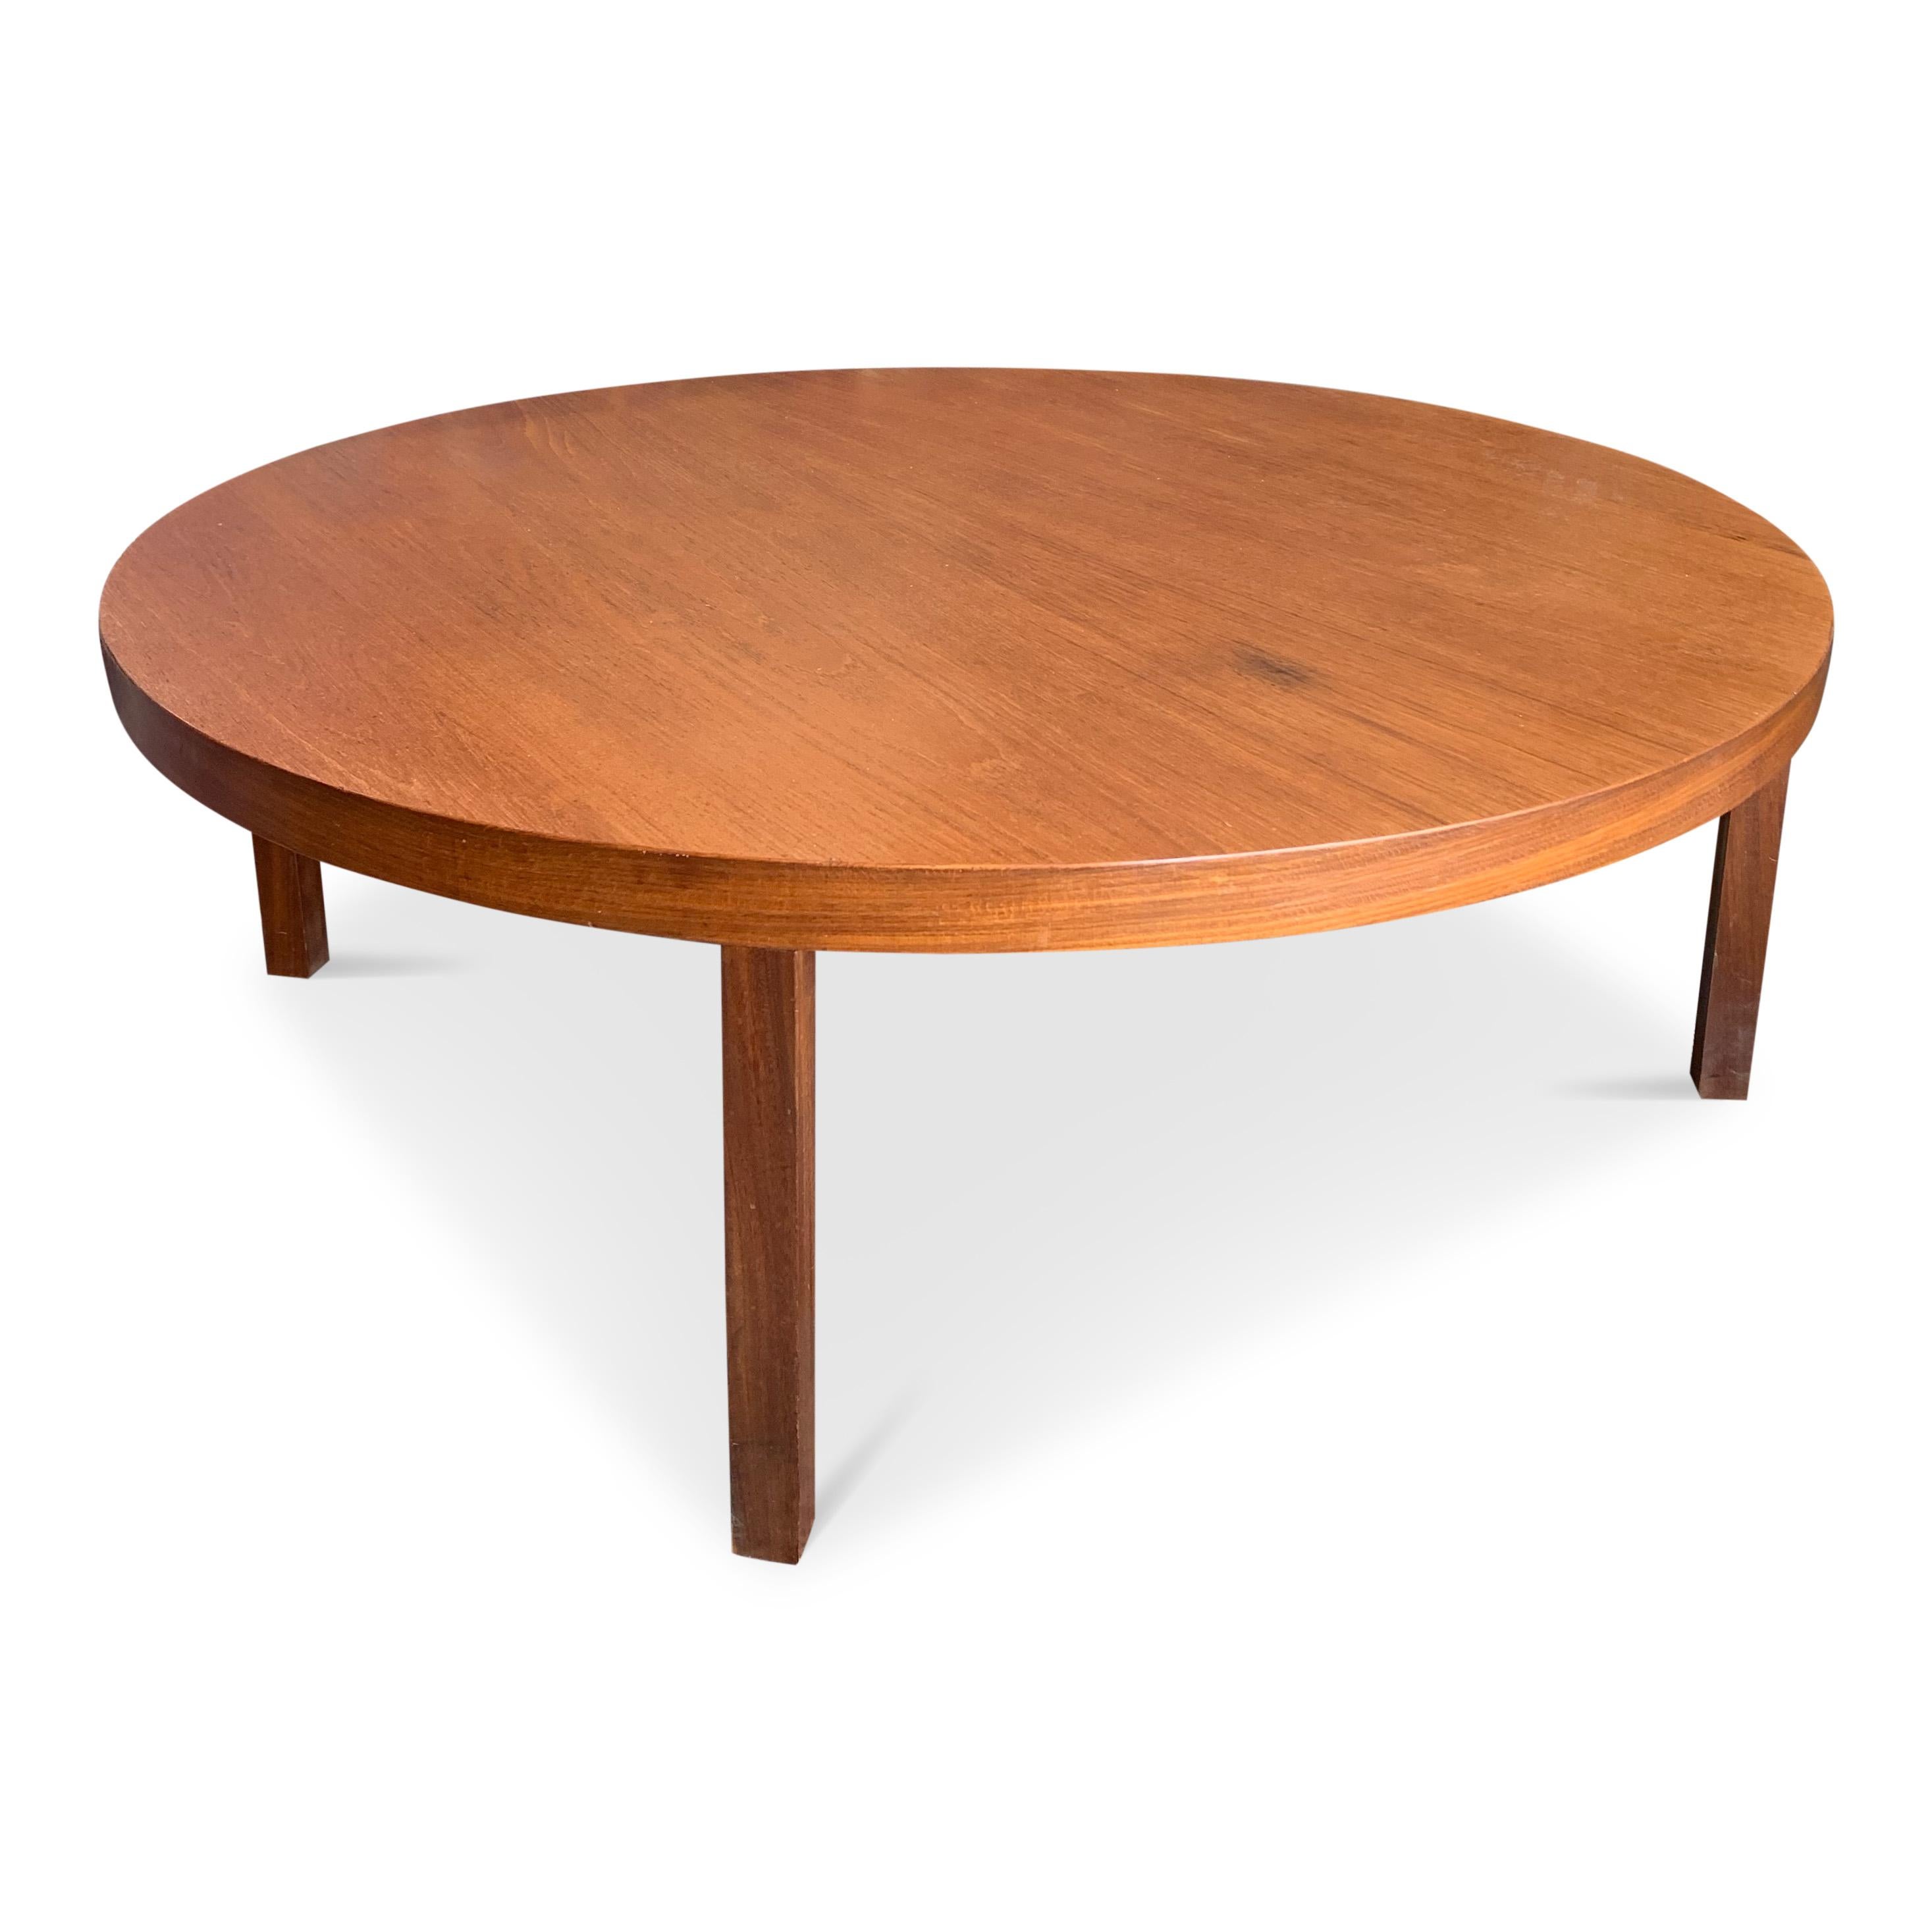 Offered is a Classic beautiful midcentury coffee table in excellent condition! The dimensions are 42